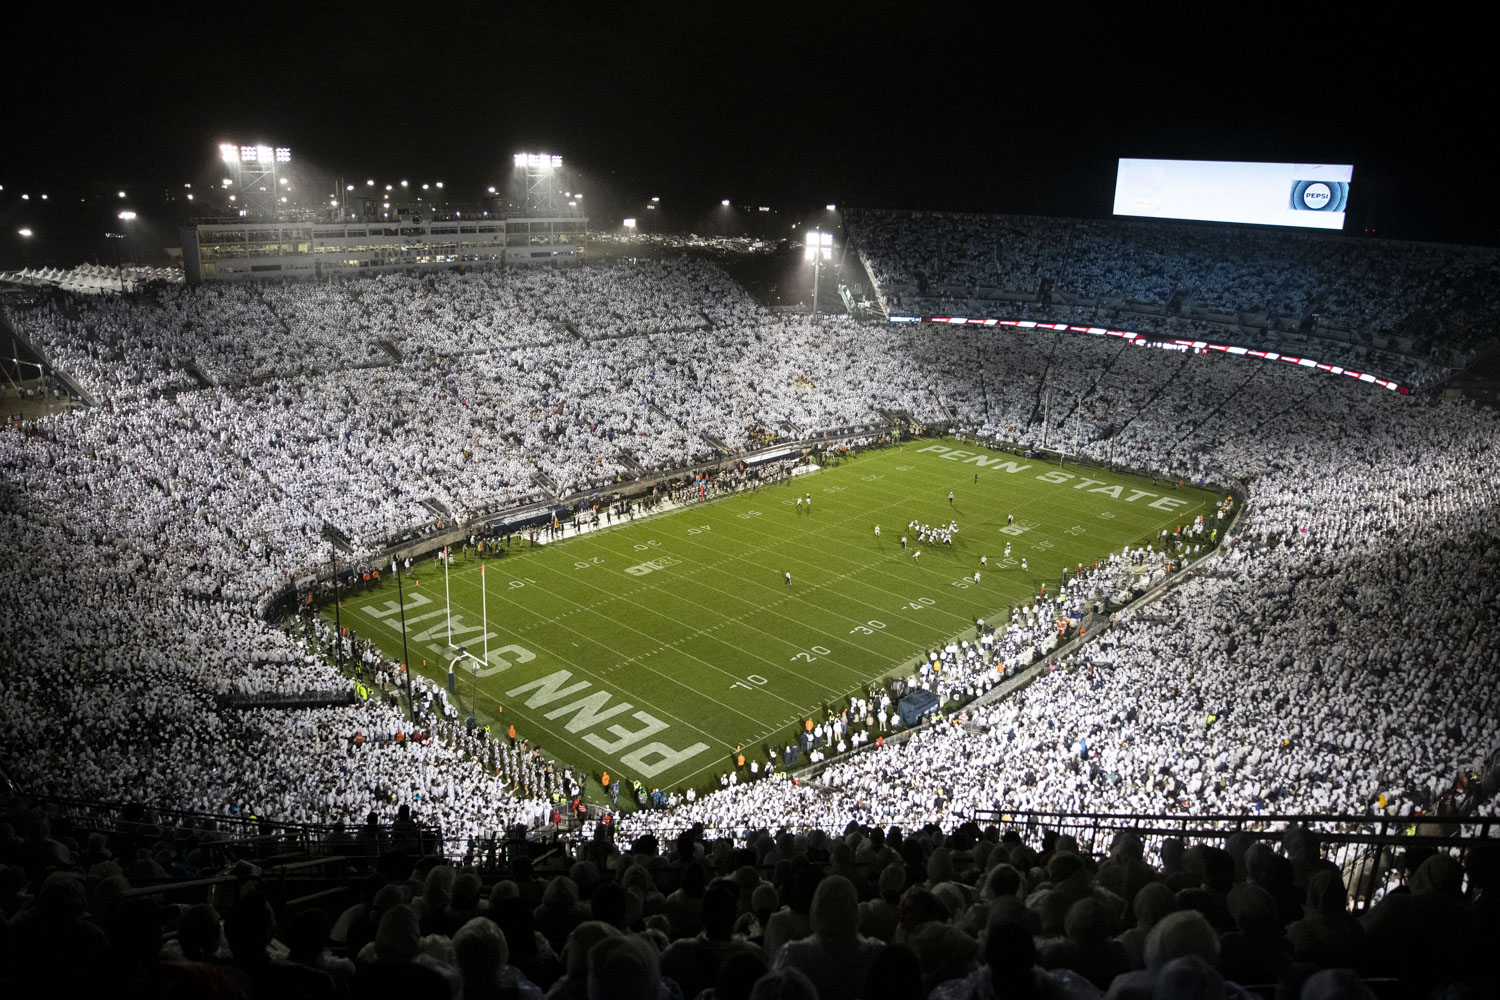 The Hawkeyes and the Nittany Lions compete during a football game between No. 24 Iowa and No. 7 Penn State at Beaver Stadium in State College, Pa., on Saturday, Sept. 23, 2023. The Nittany Lions defeated the Hawkeyes, 31-0.